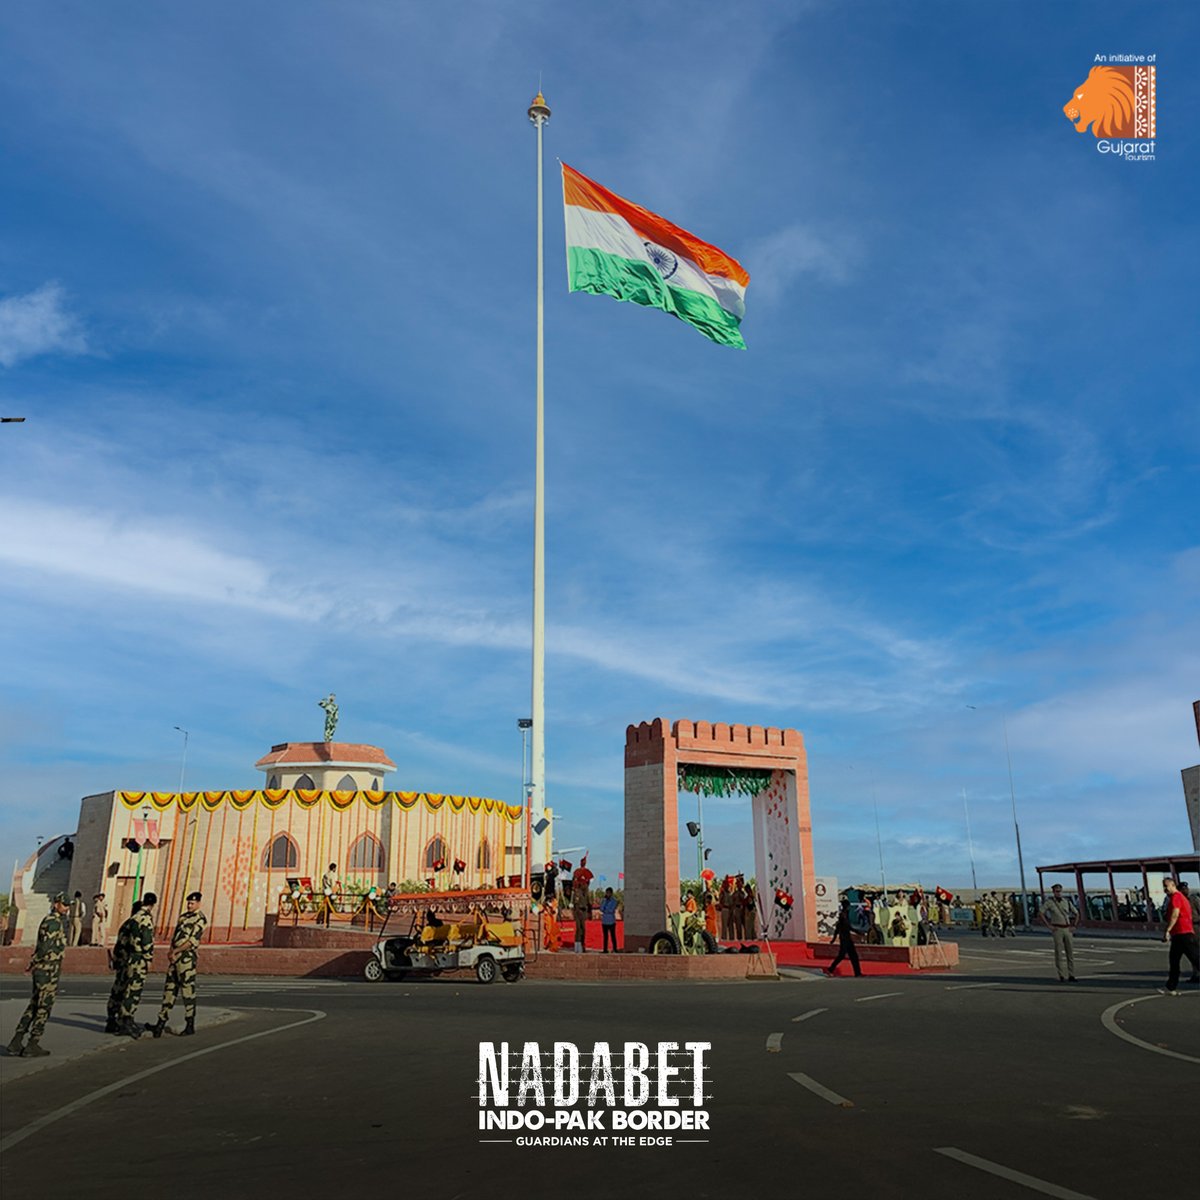 Stand tall with pride and honour, as we raise our flag high in the air. With every step you take, the reverberating beat of our nation's heart fills your soul

#flag #indianflag #patriotic #visitnadabet #IndoPakBorde #gujarattourism #exploregujarat #incredibleindia